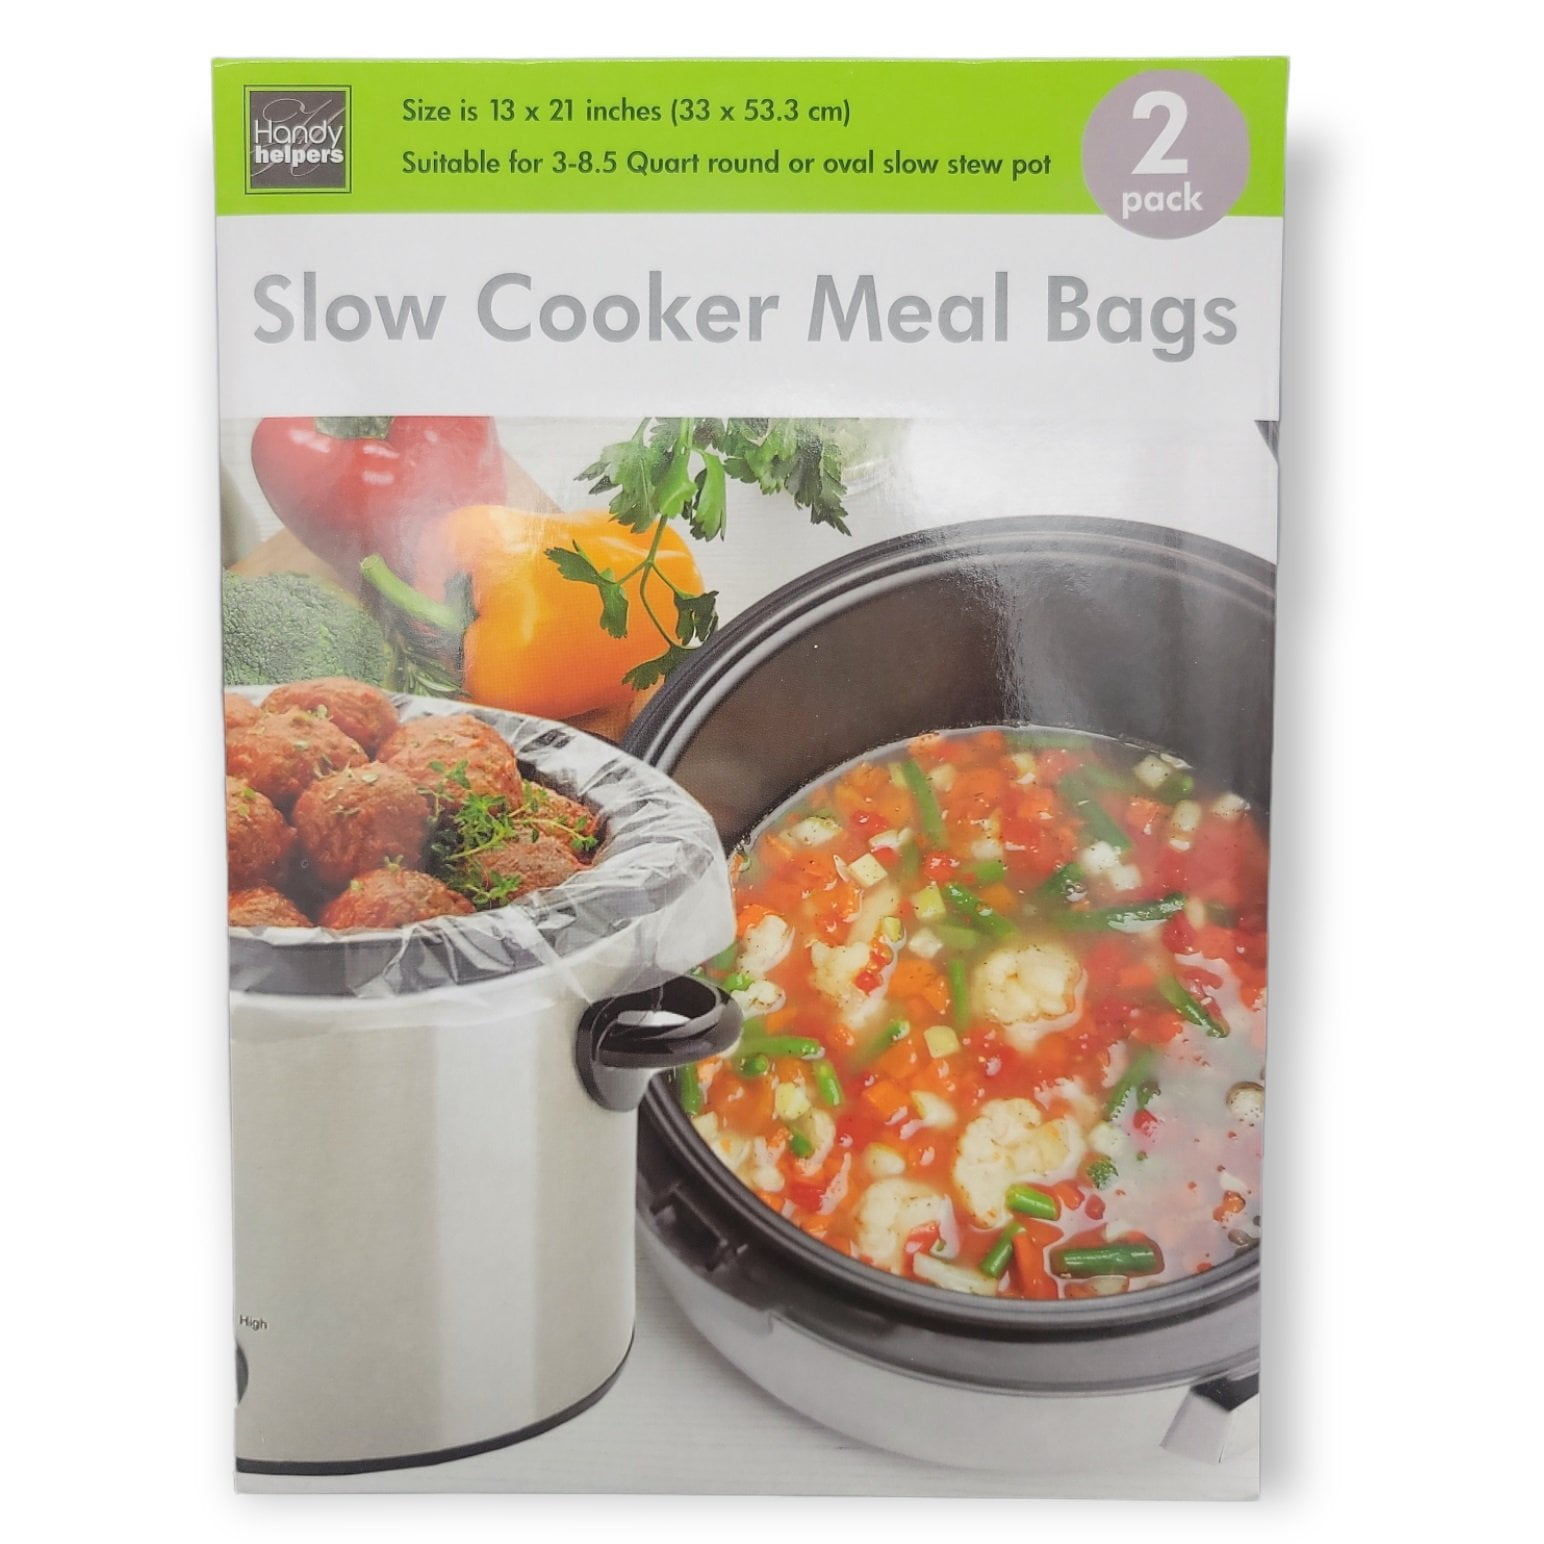 OOFLAYE 16 Bags Slow Cooker Liners, Disposable Multi Use Cooking Bags,Large Size Fit 3qt to 8qt, Plastic Bags for Slow Cooker, Pans, Aluminum Cooking